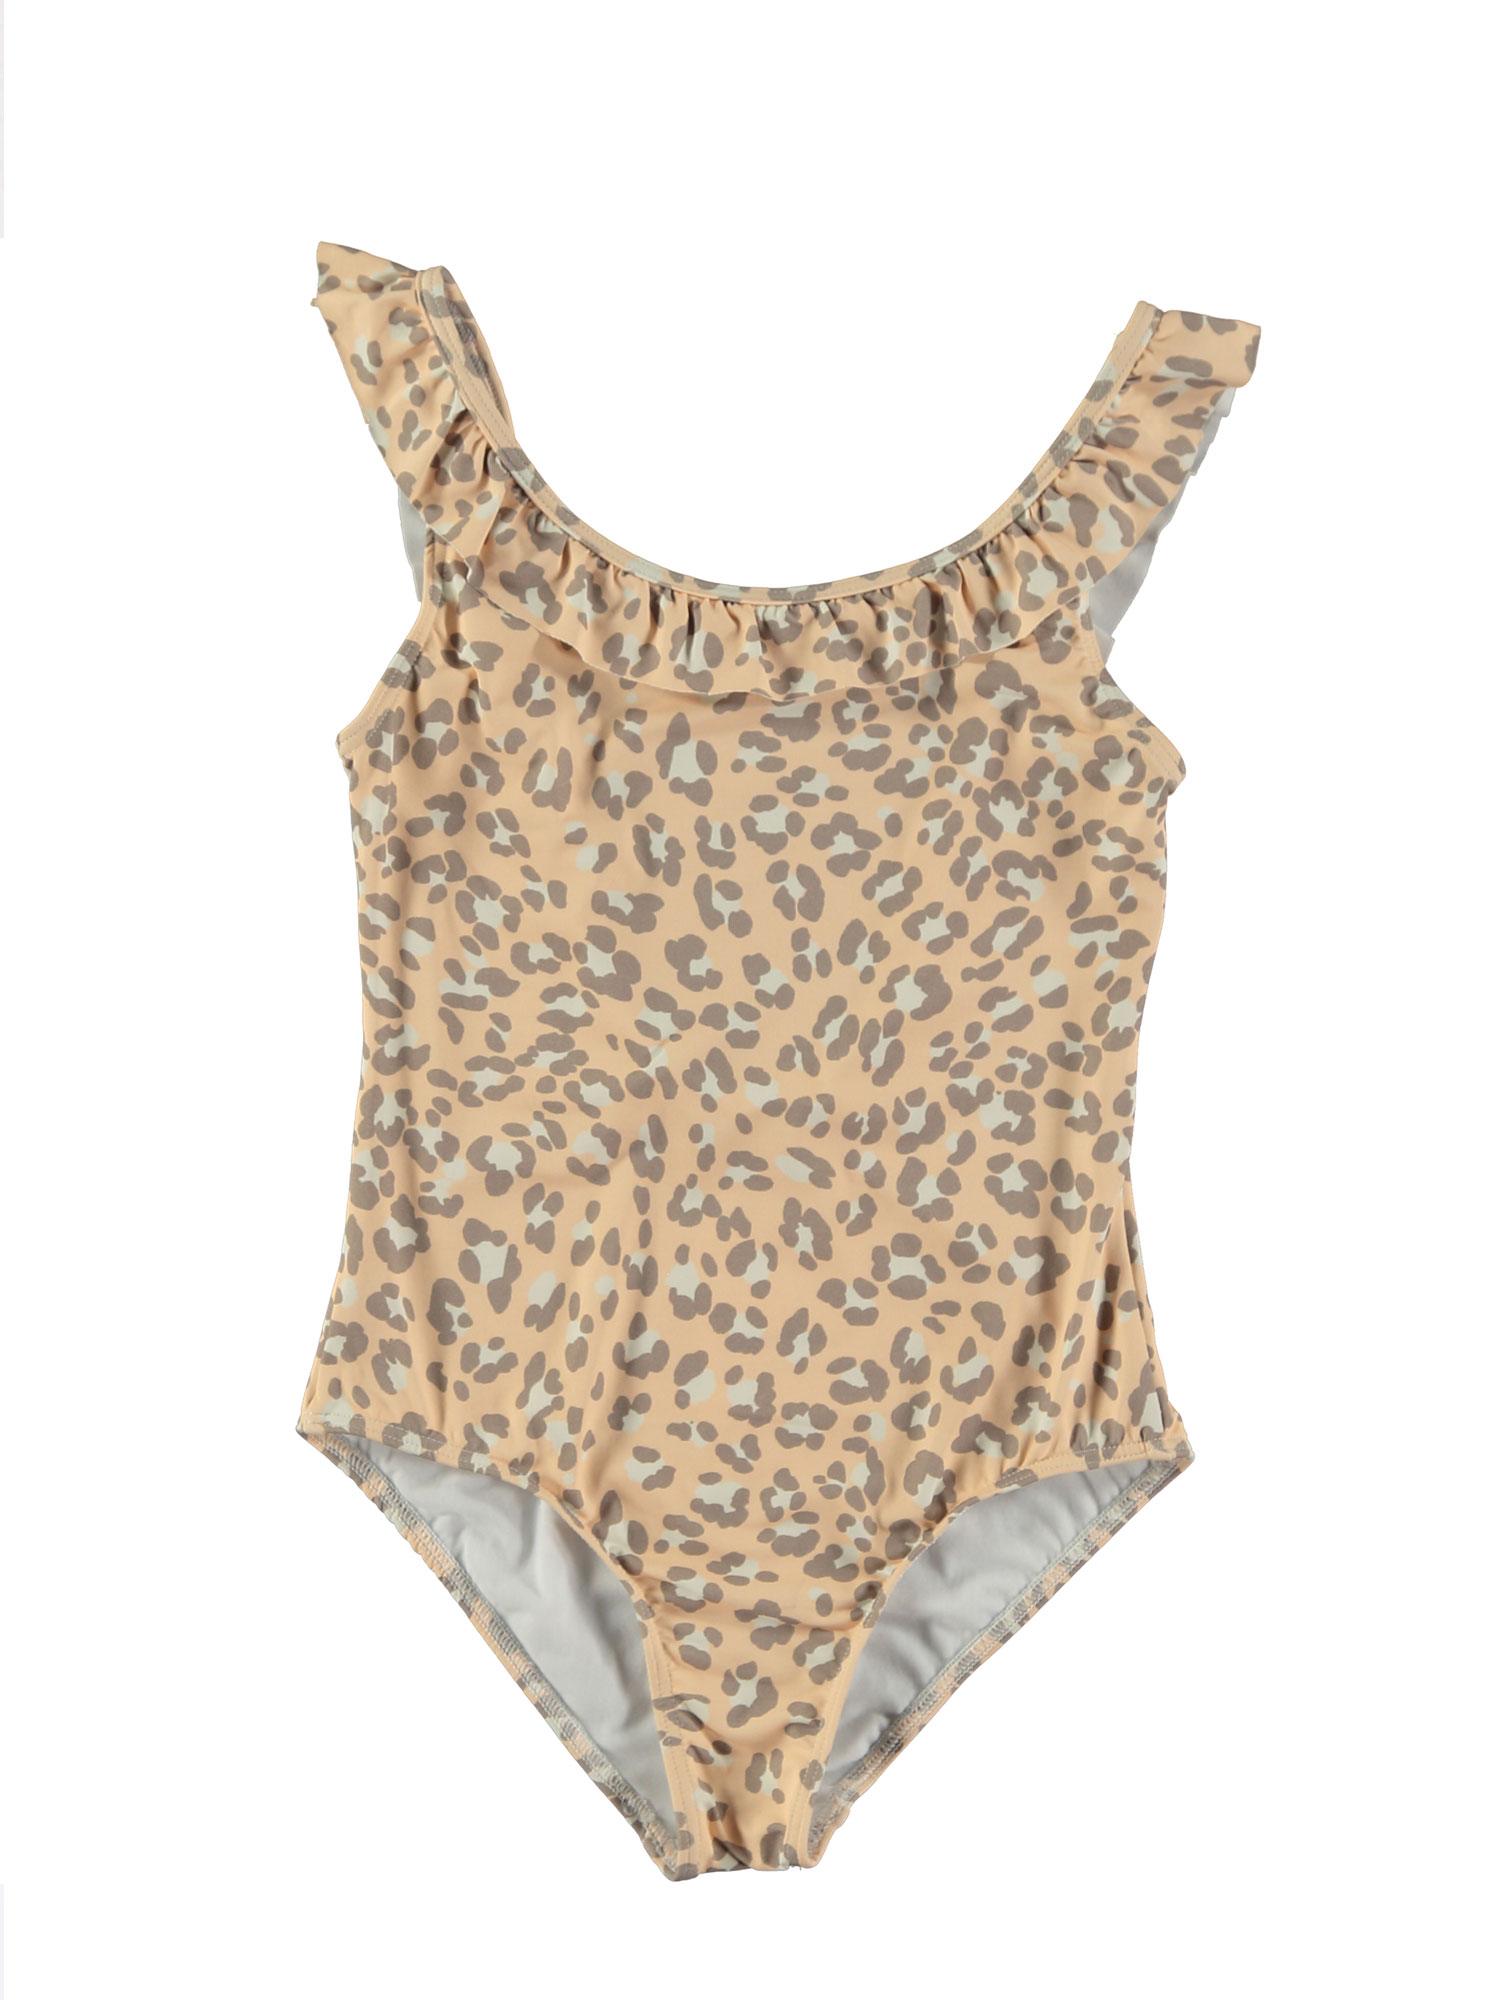 ANIMAL PRINT SWIMSUIT WITH RUFFLED STRAPS 2